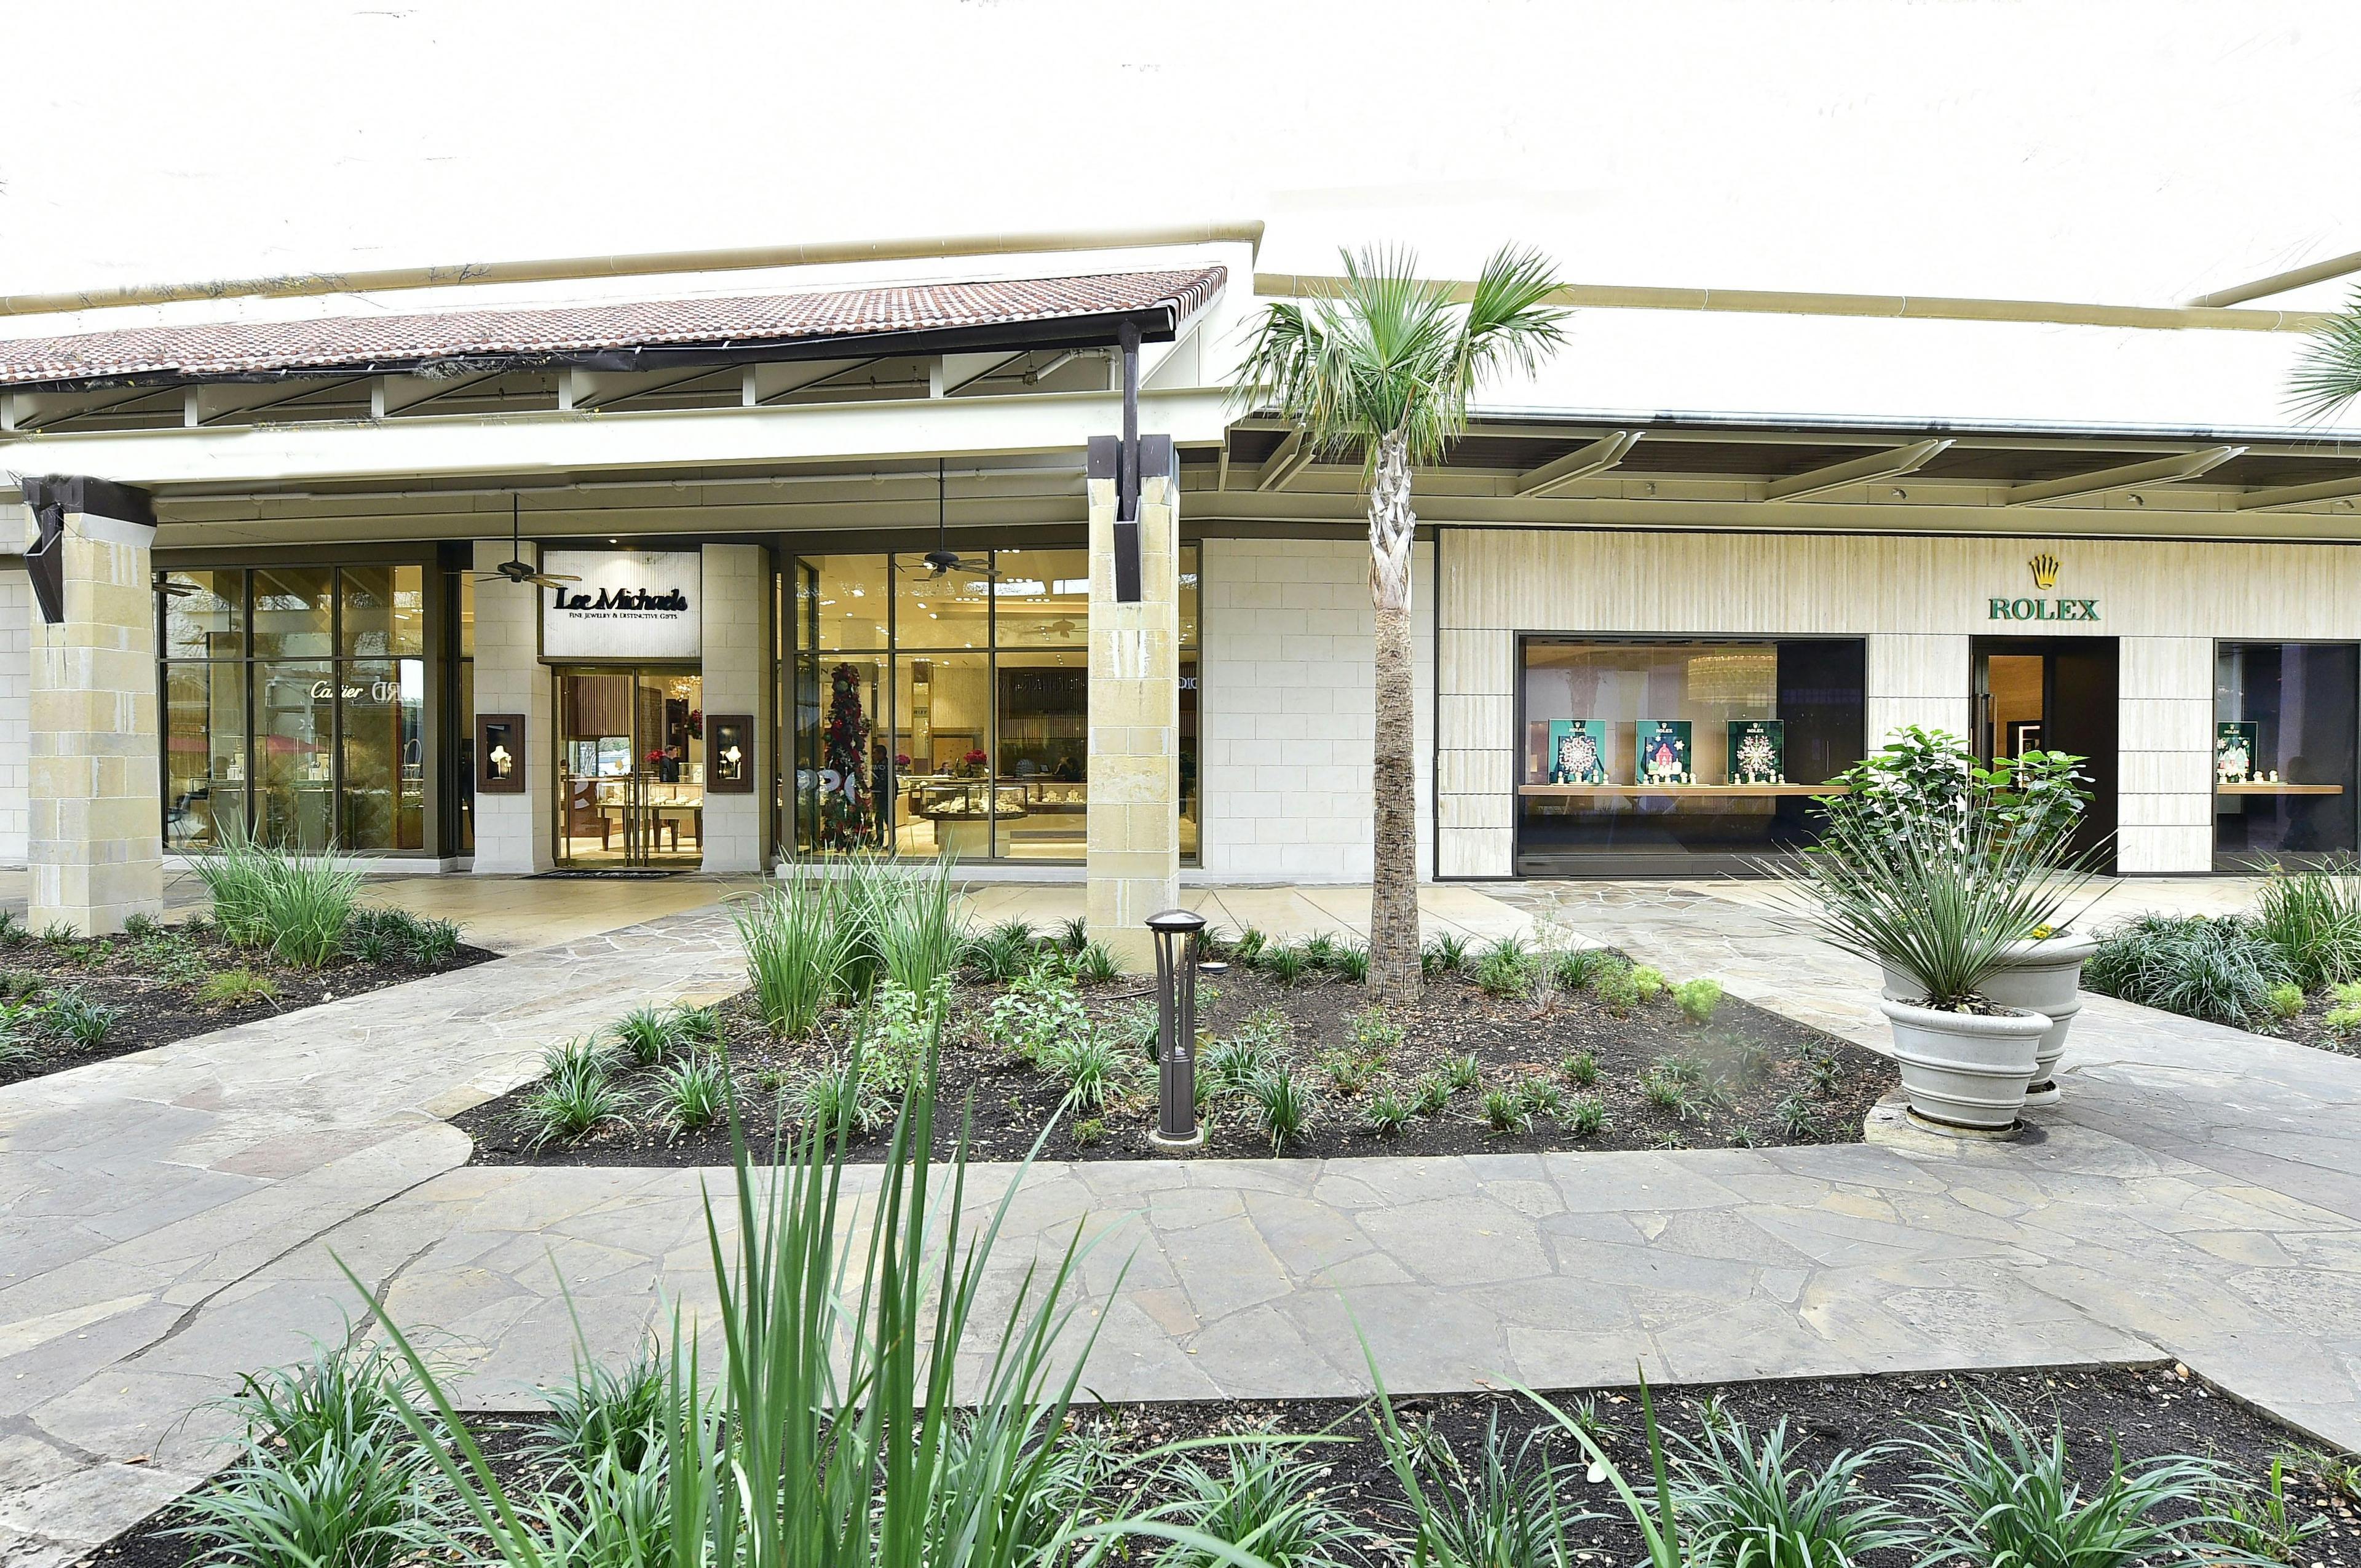 a photograph of the storefront of Lee Michaels Fine Jewelry in The Shops at LaCantera in San Antonio Texas